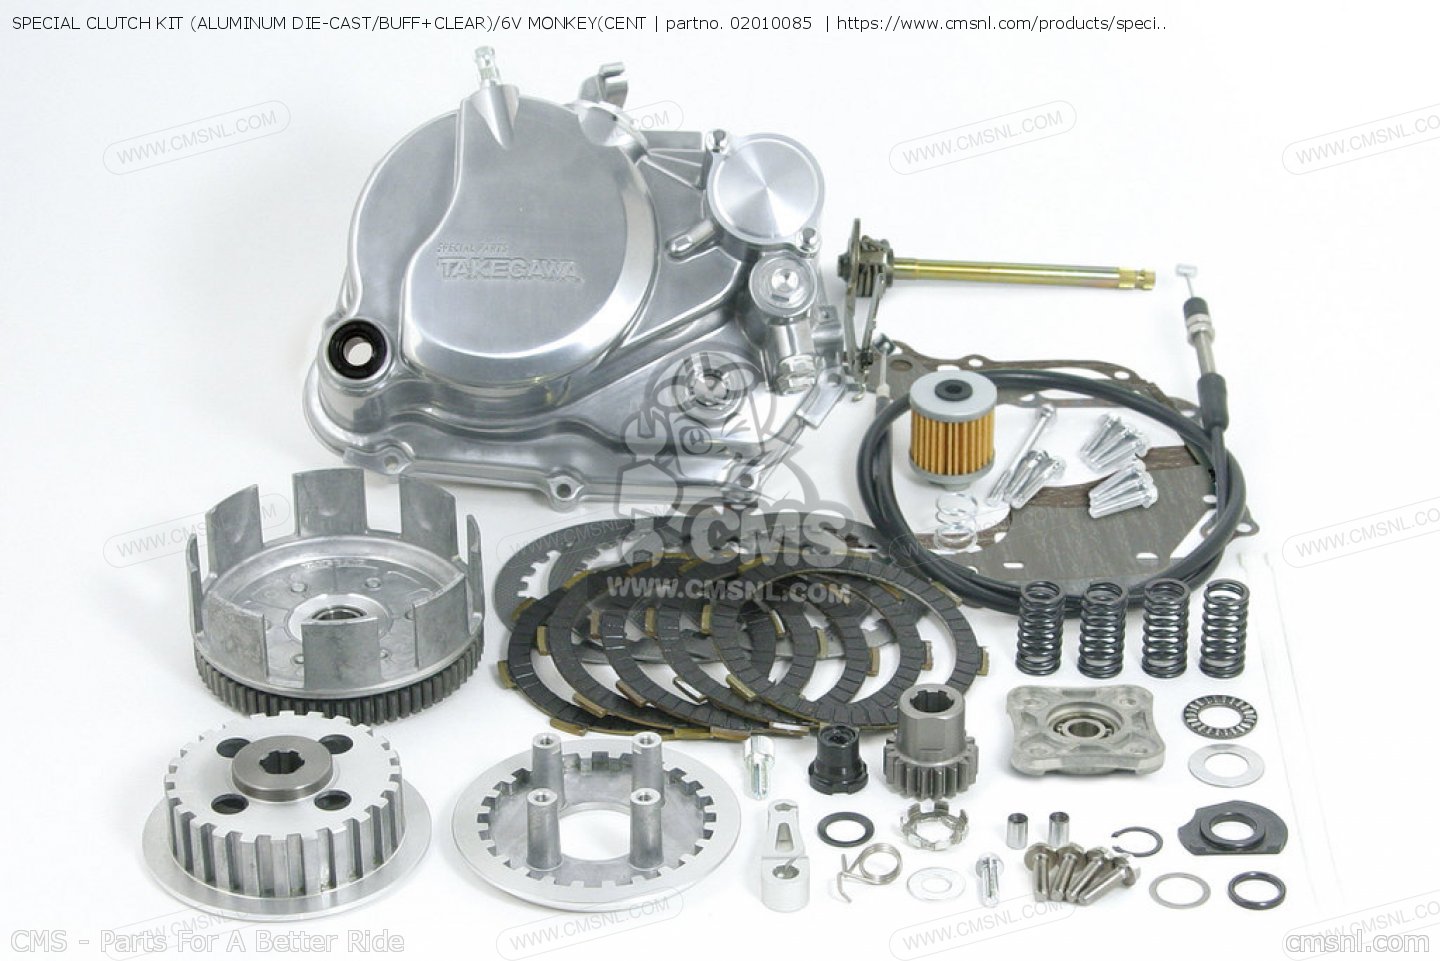 02010085: Special Clutch Kit (aluminum Die-cast/buff+clear)/6v 